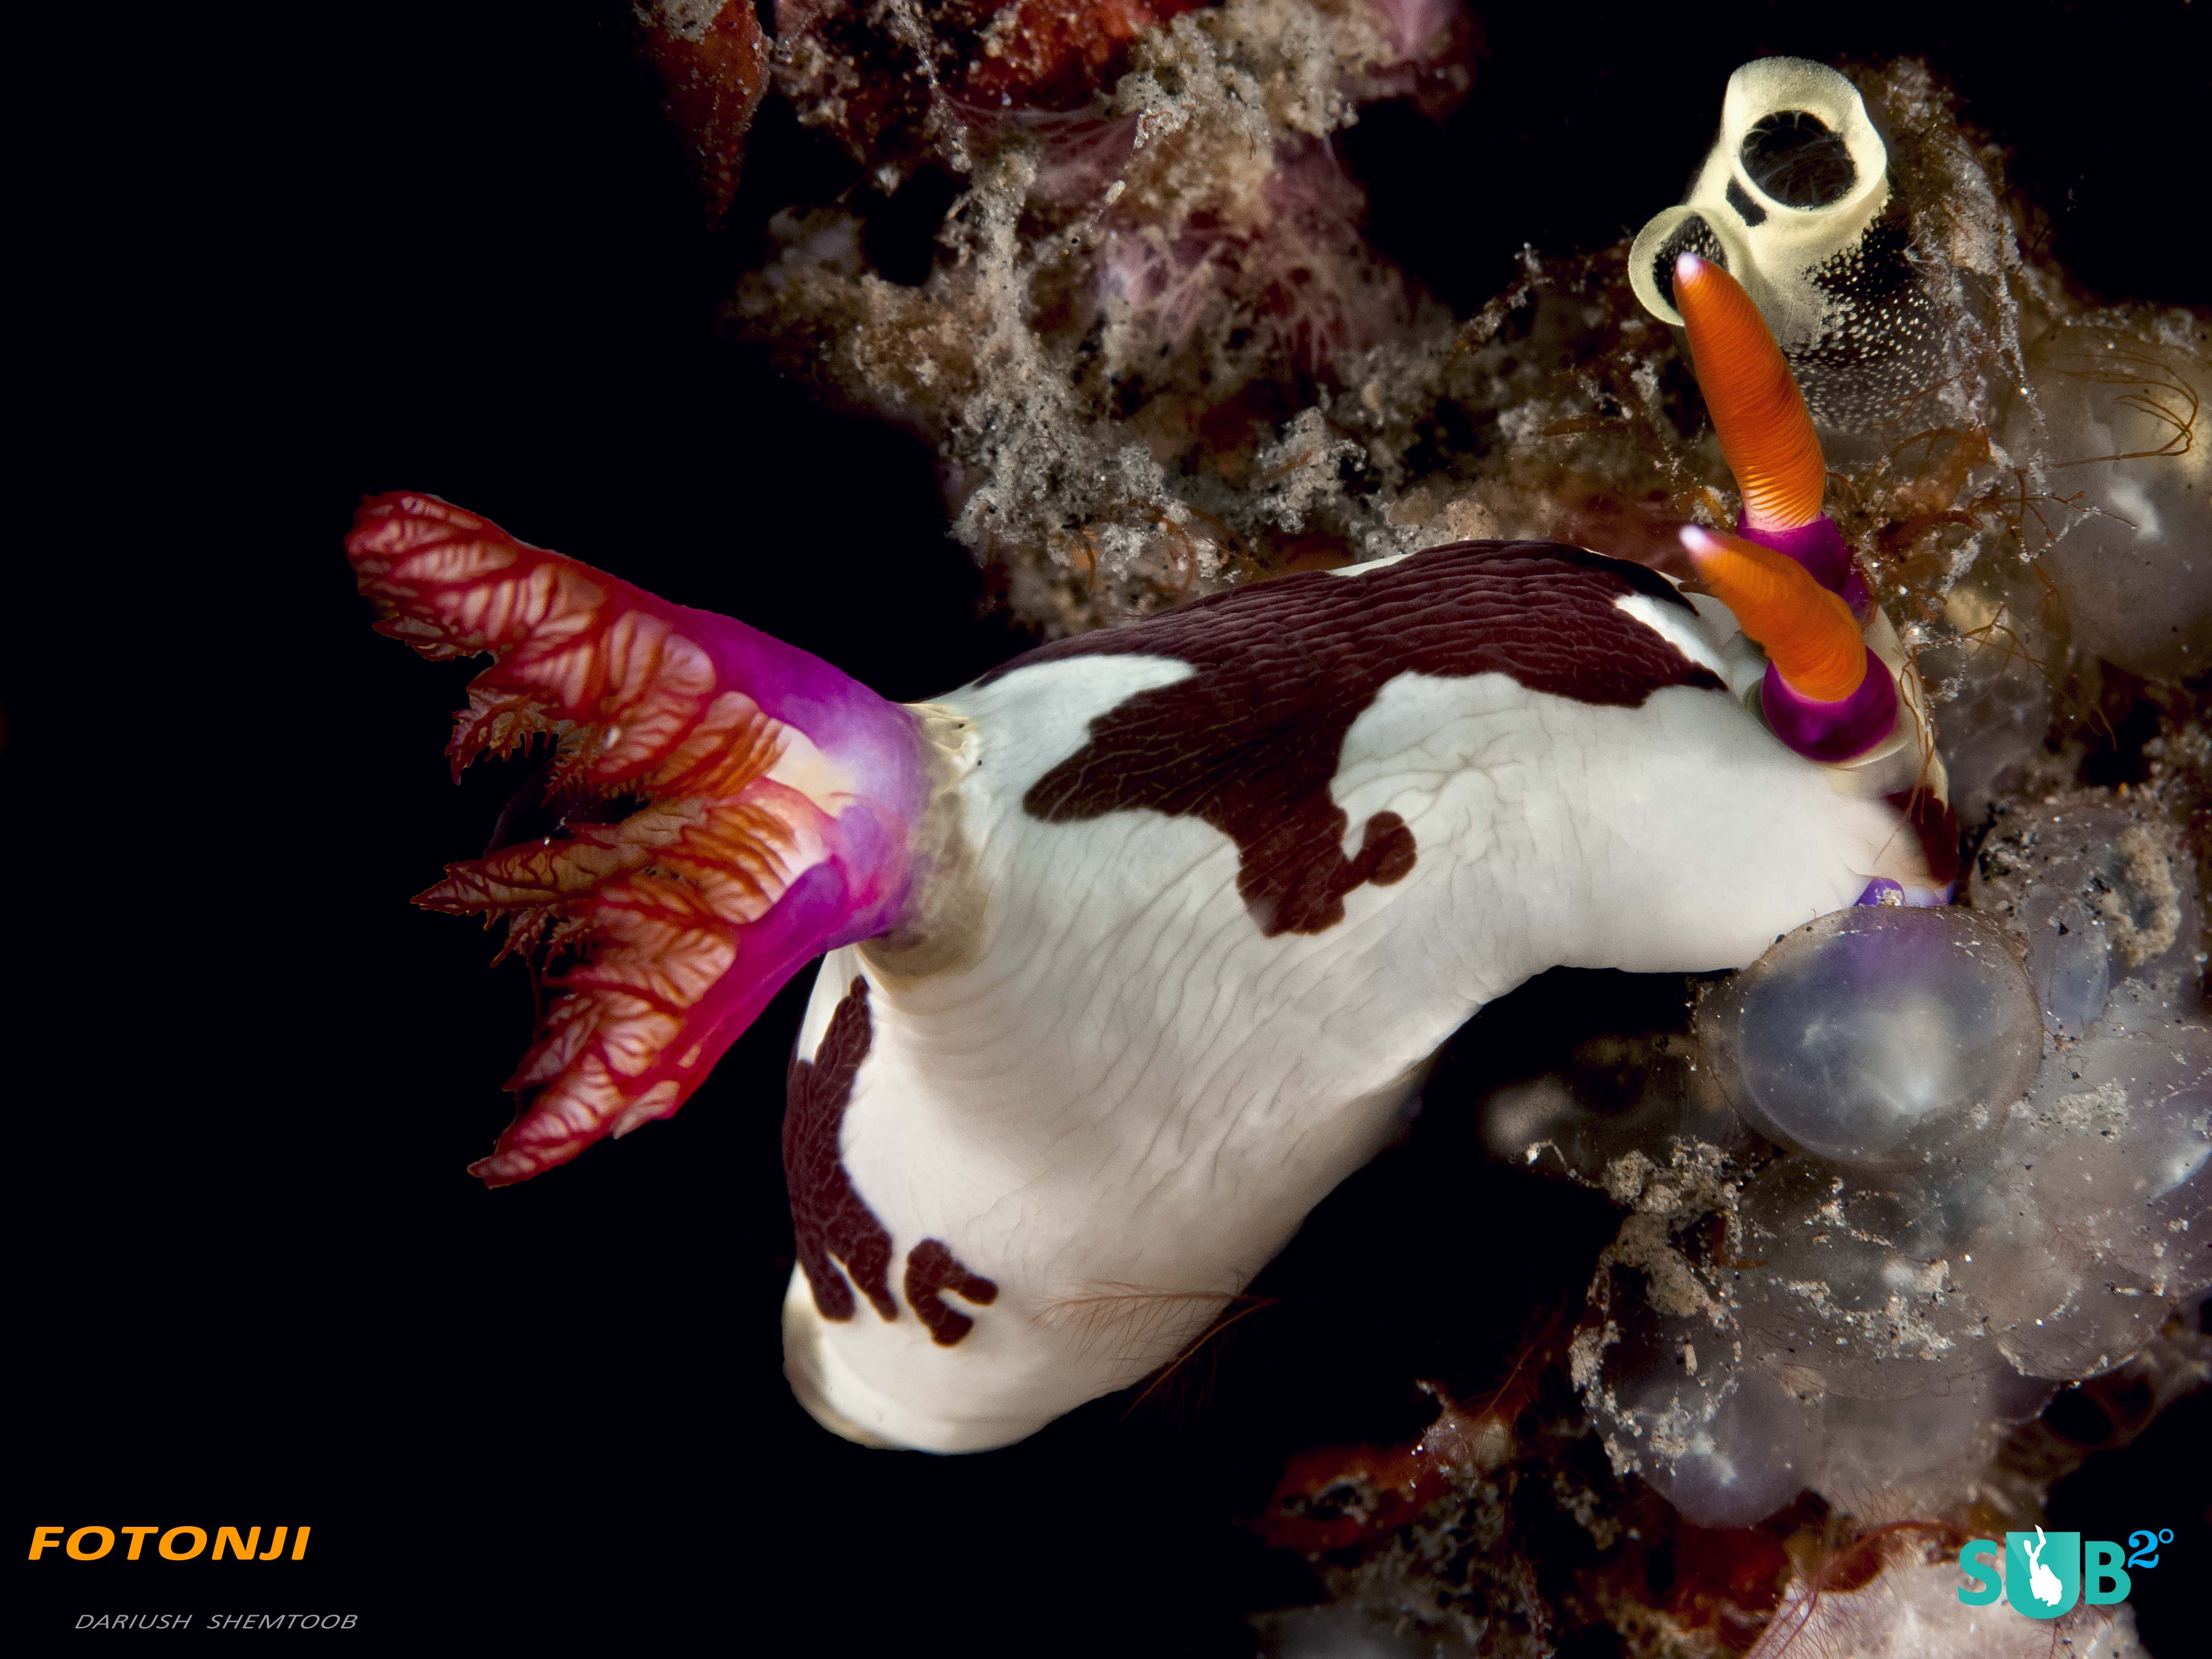 One of countless nudibranchs found in Lembeh.